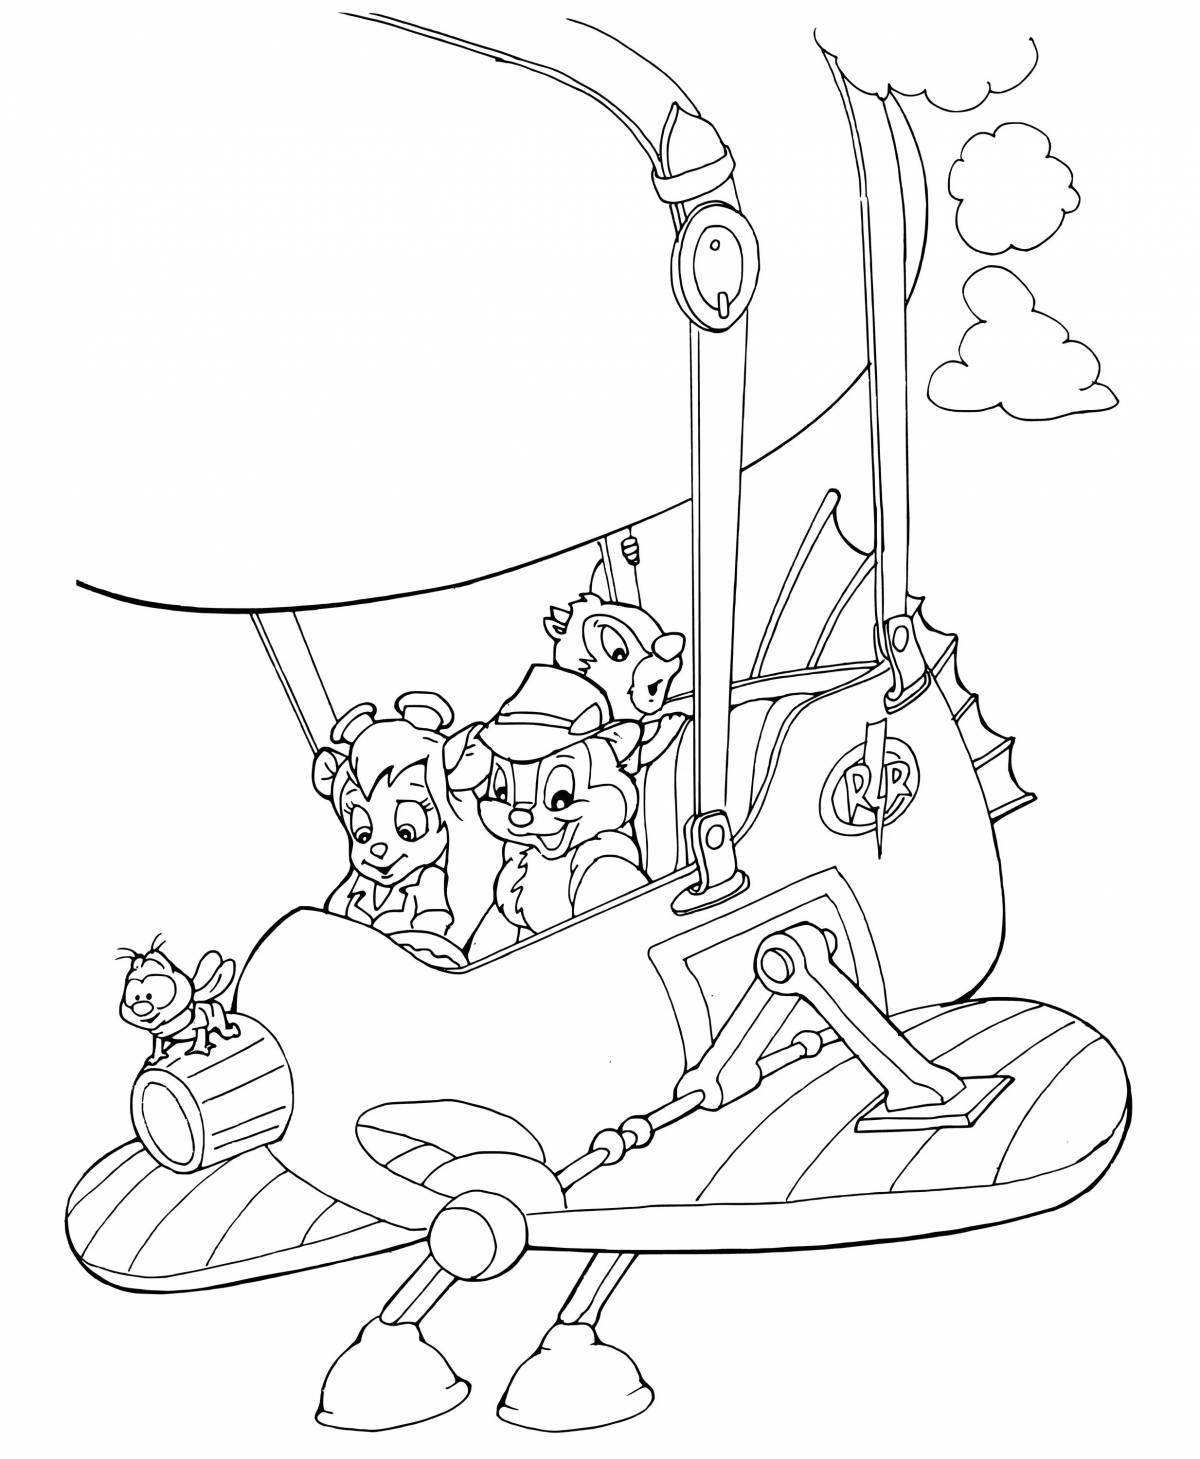 Chip and Dale Rescuers exciting coloring book